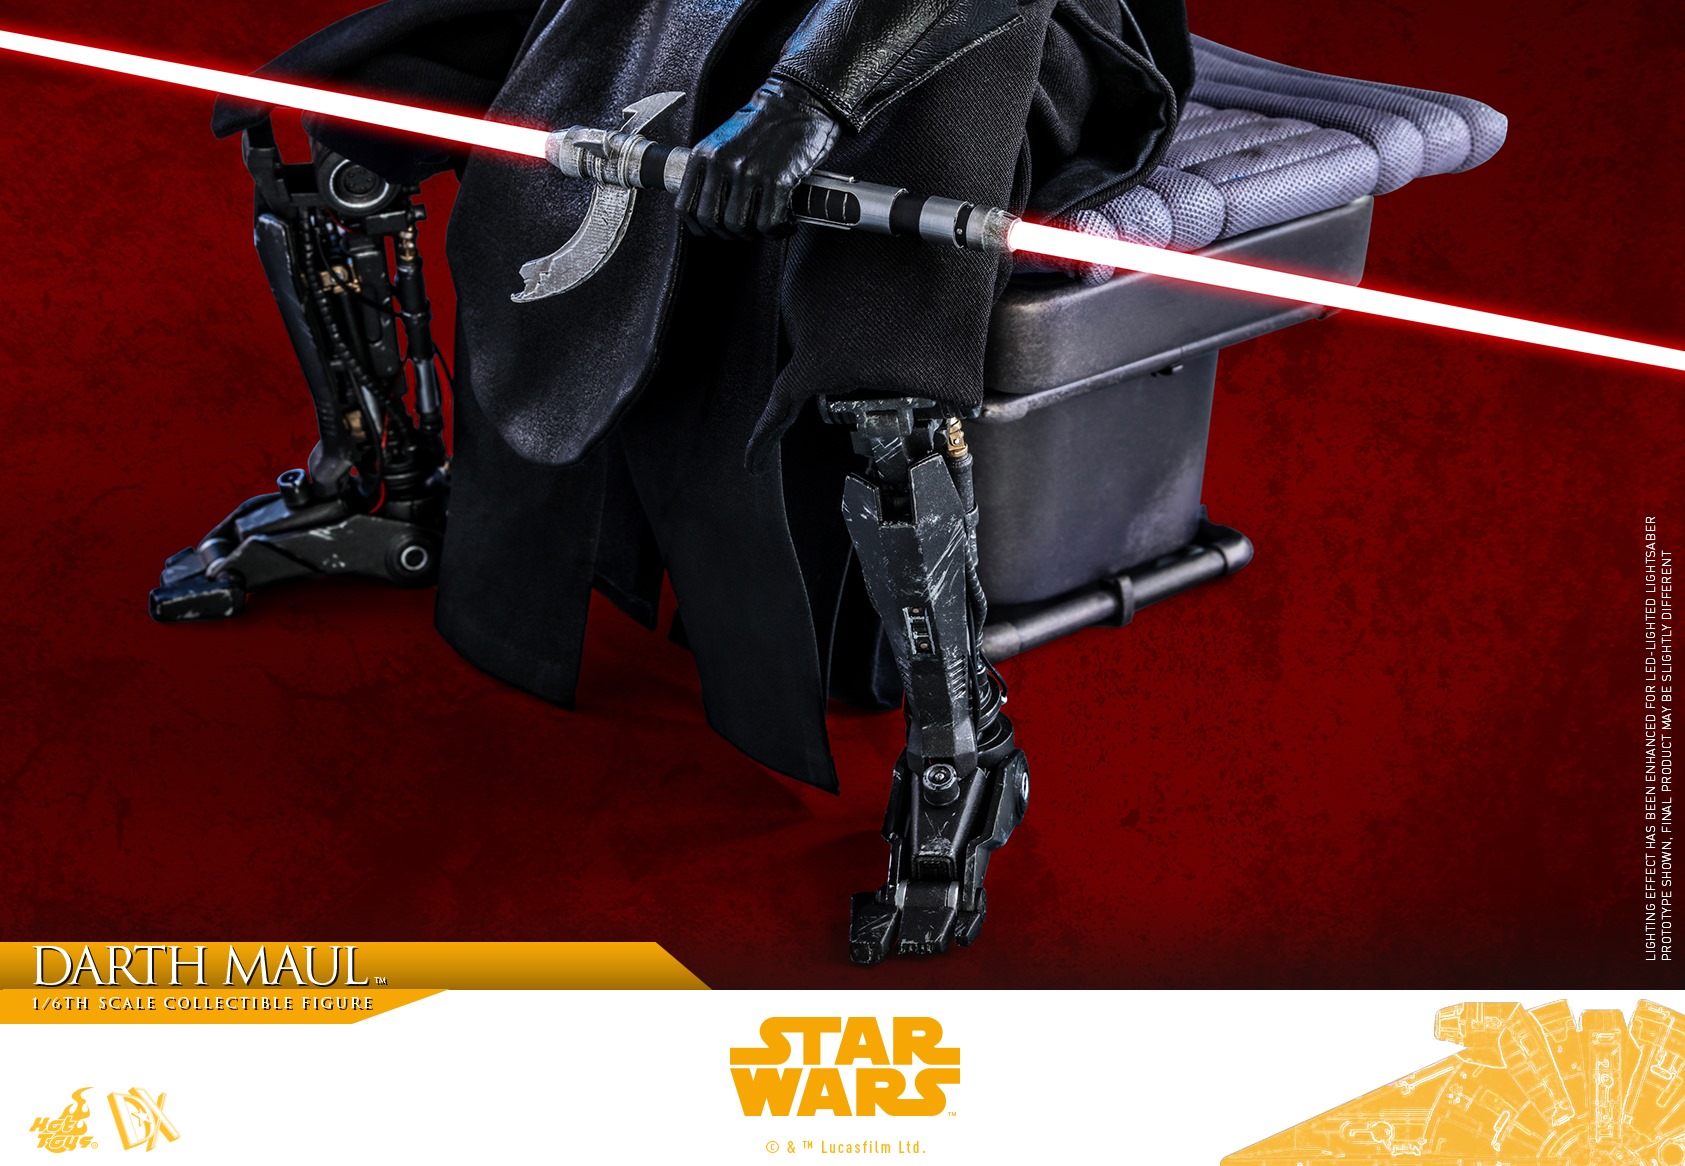 Hot Toys Reveals Their SOLO: A STAR WARS STORY Darth Maul ...